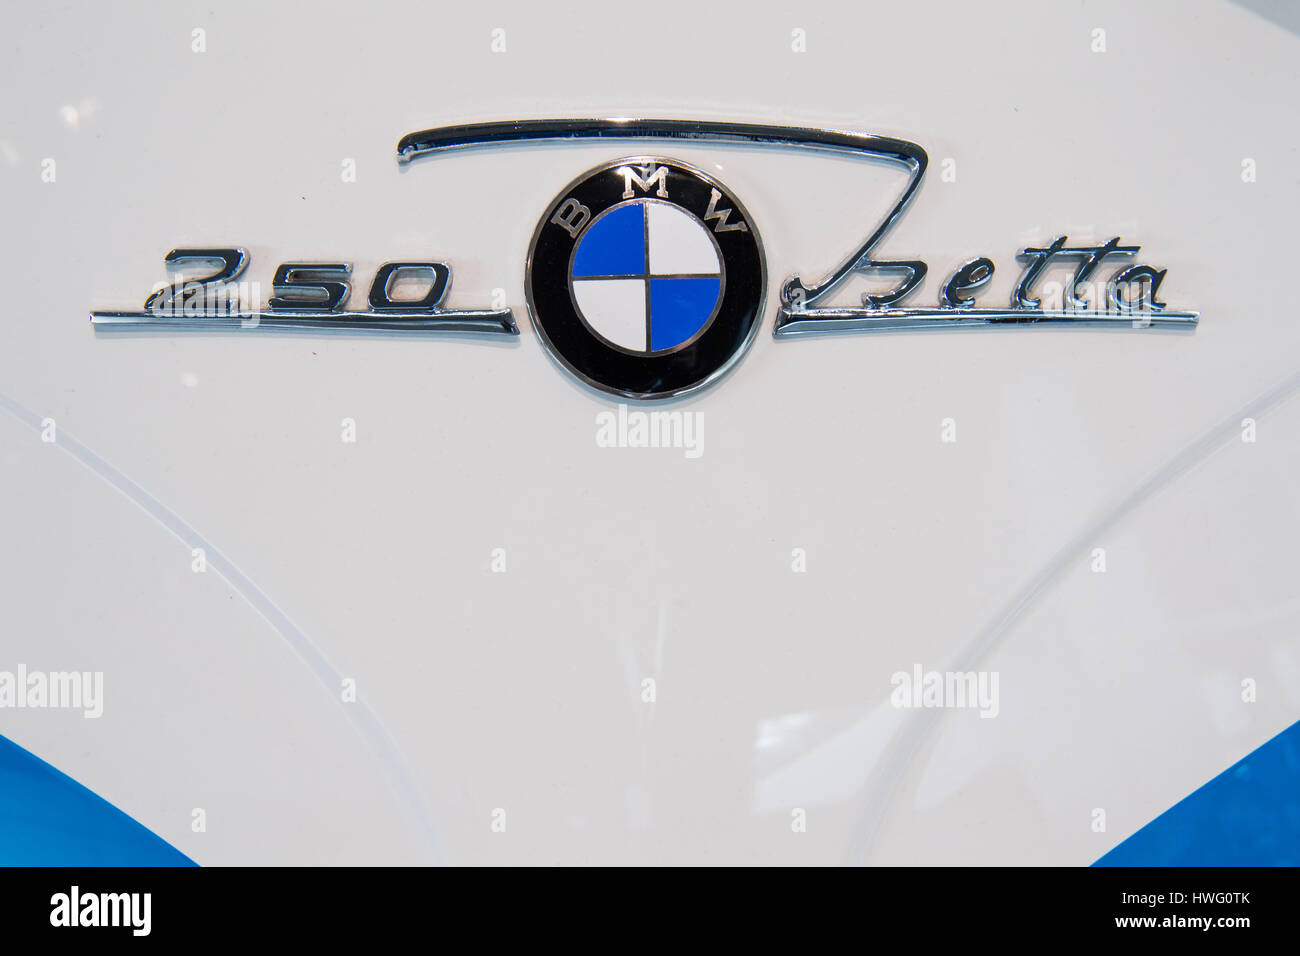 Munich, Germany. 21st Mar, 2017. The BMW logo on the bonnet of an Isetta, photoghraphed duirng the BMW financial statement press conference in Munich, Germany, 21 March 2017. Photo: Peter Kneffel/dpa/Alamy Live News Stock Photo